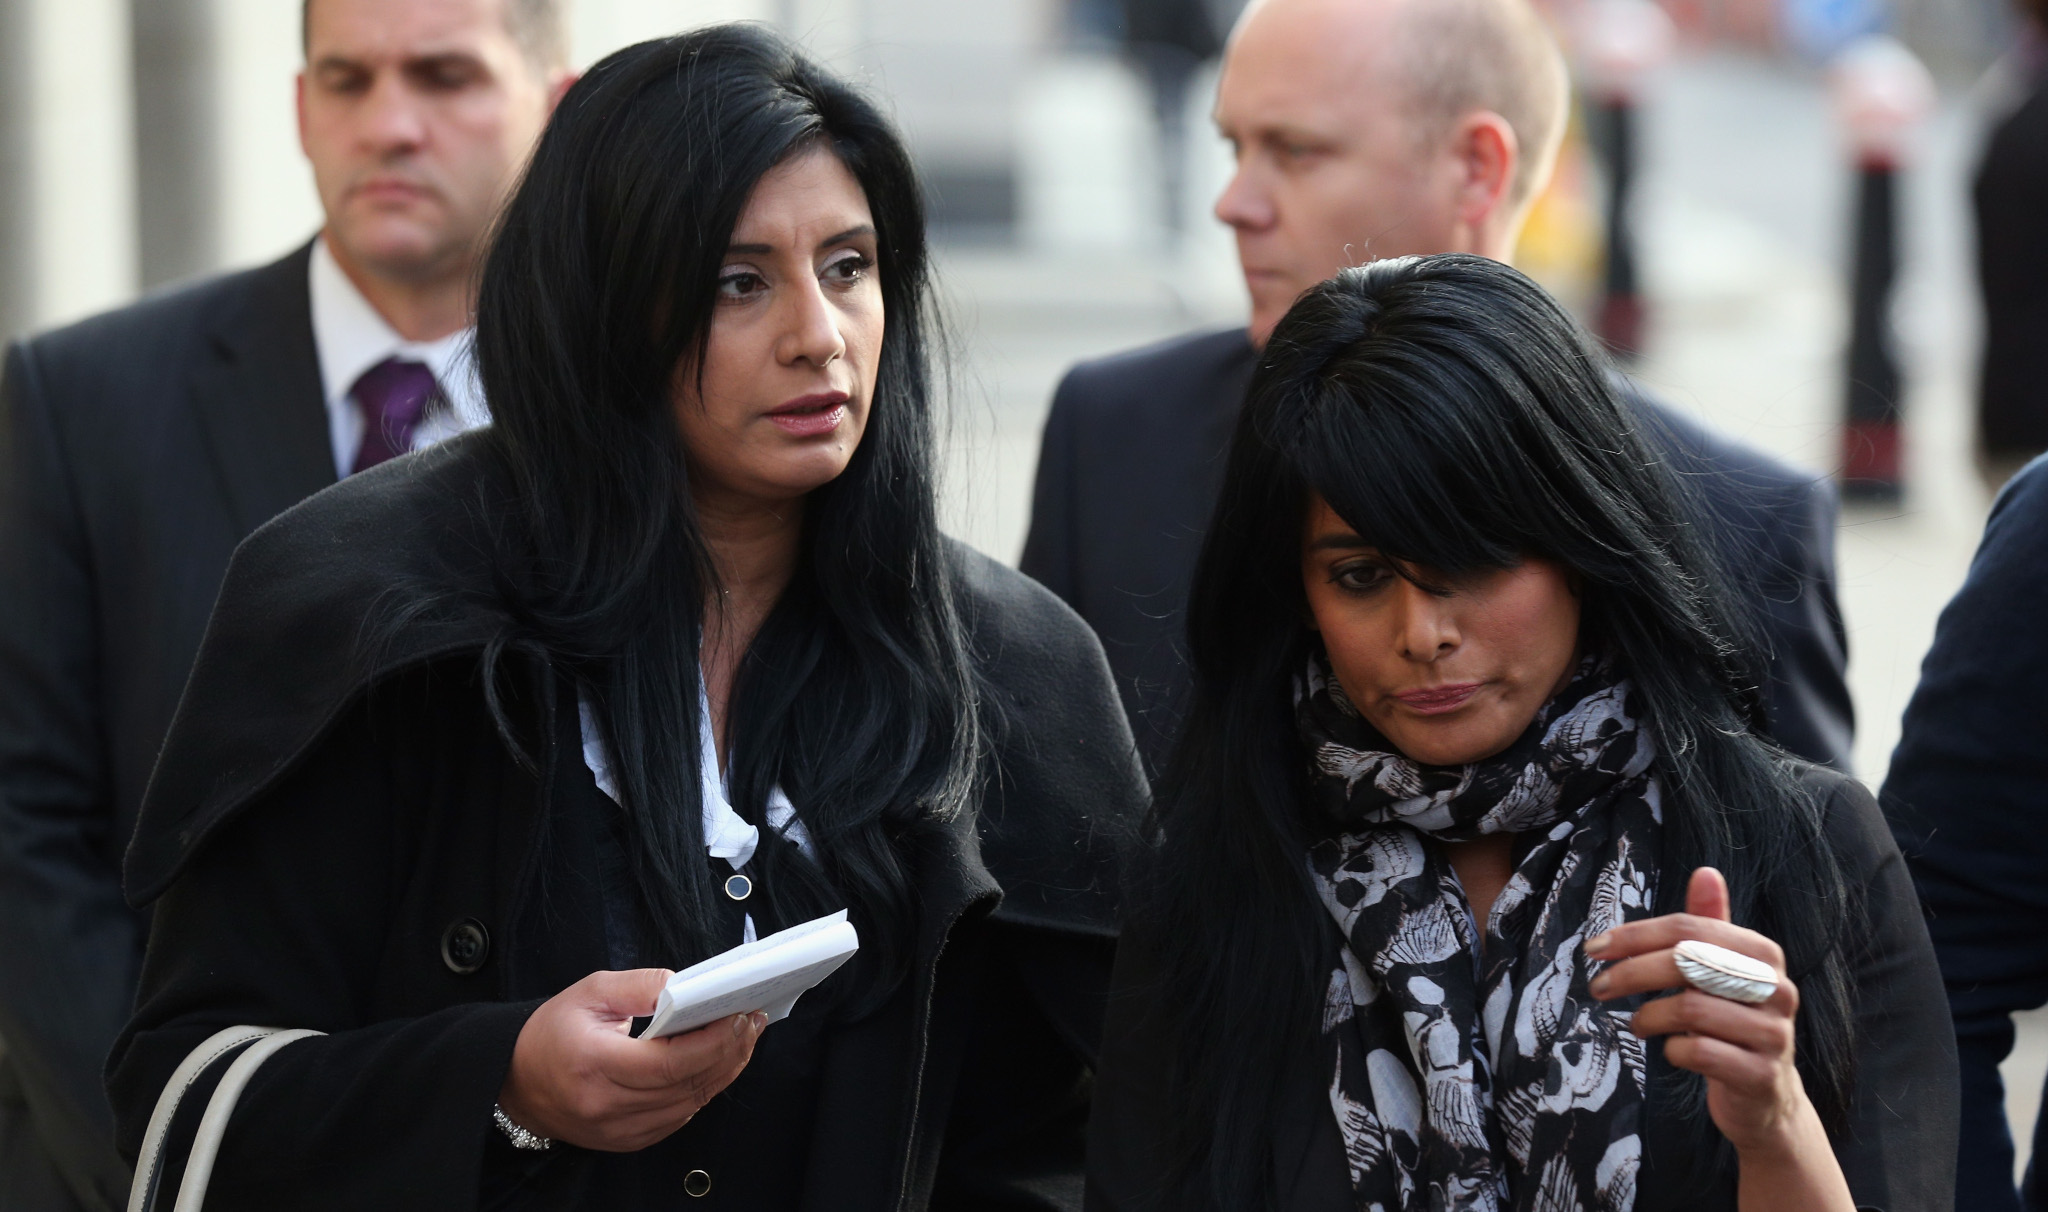 Maz Saleem (right) at a hearing into her father’s murder. (Photo: Oli Scarff / Getty)